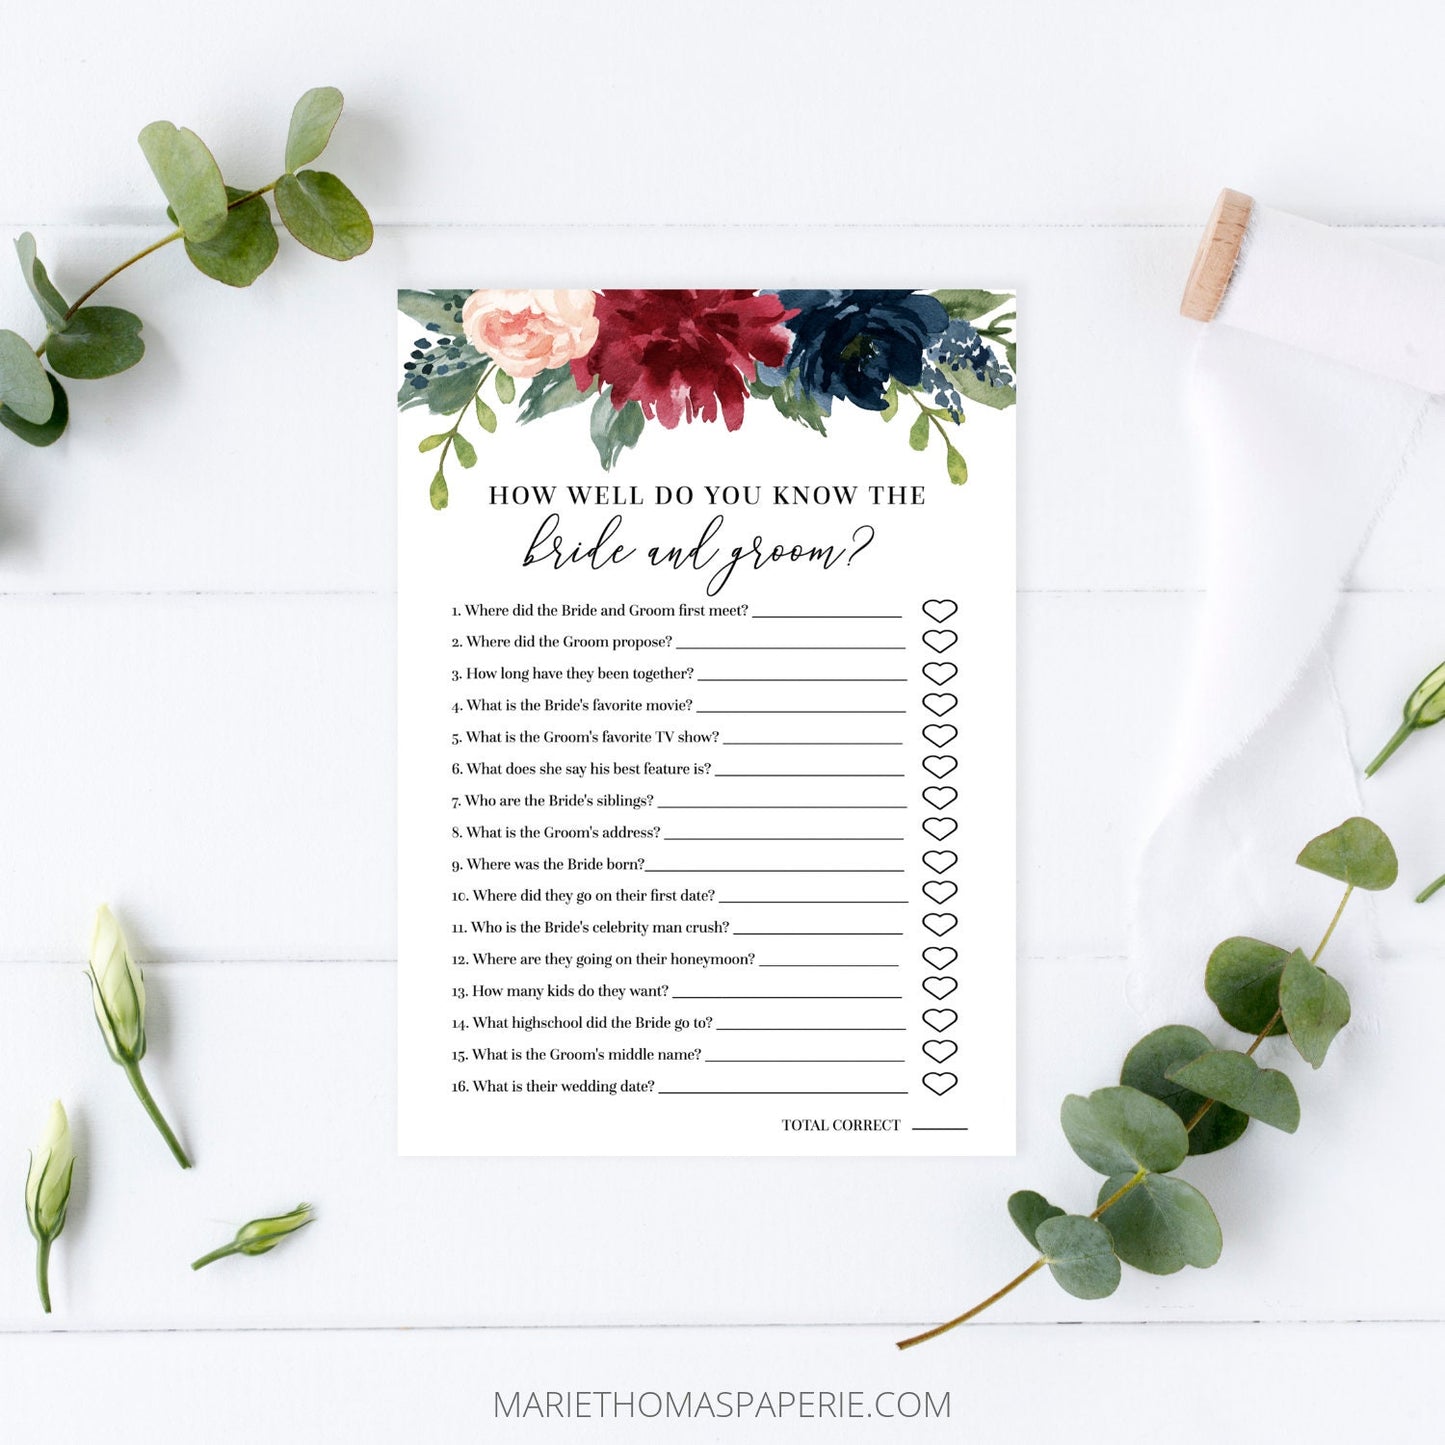 Editable How Well Do You Know the Bride and Groom Bridal Shower Games Burgundy Floral Template